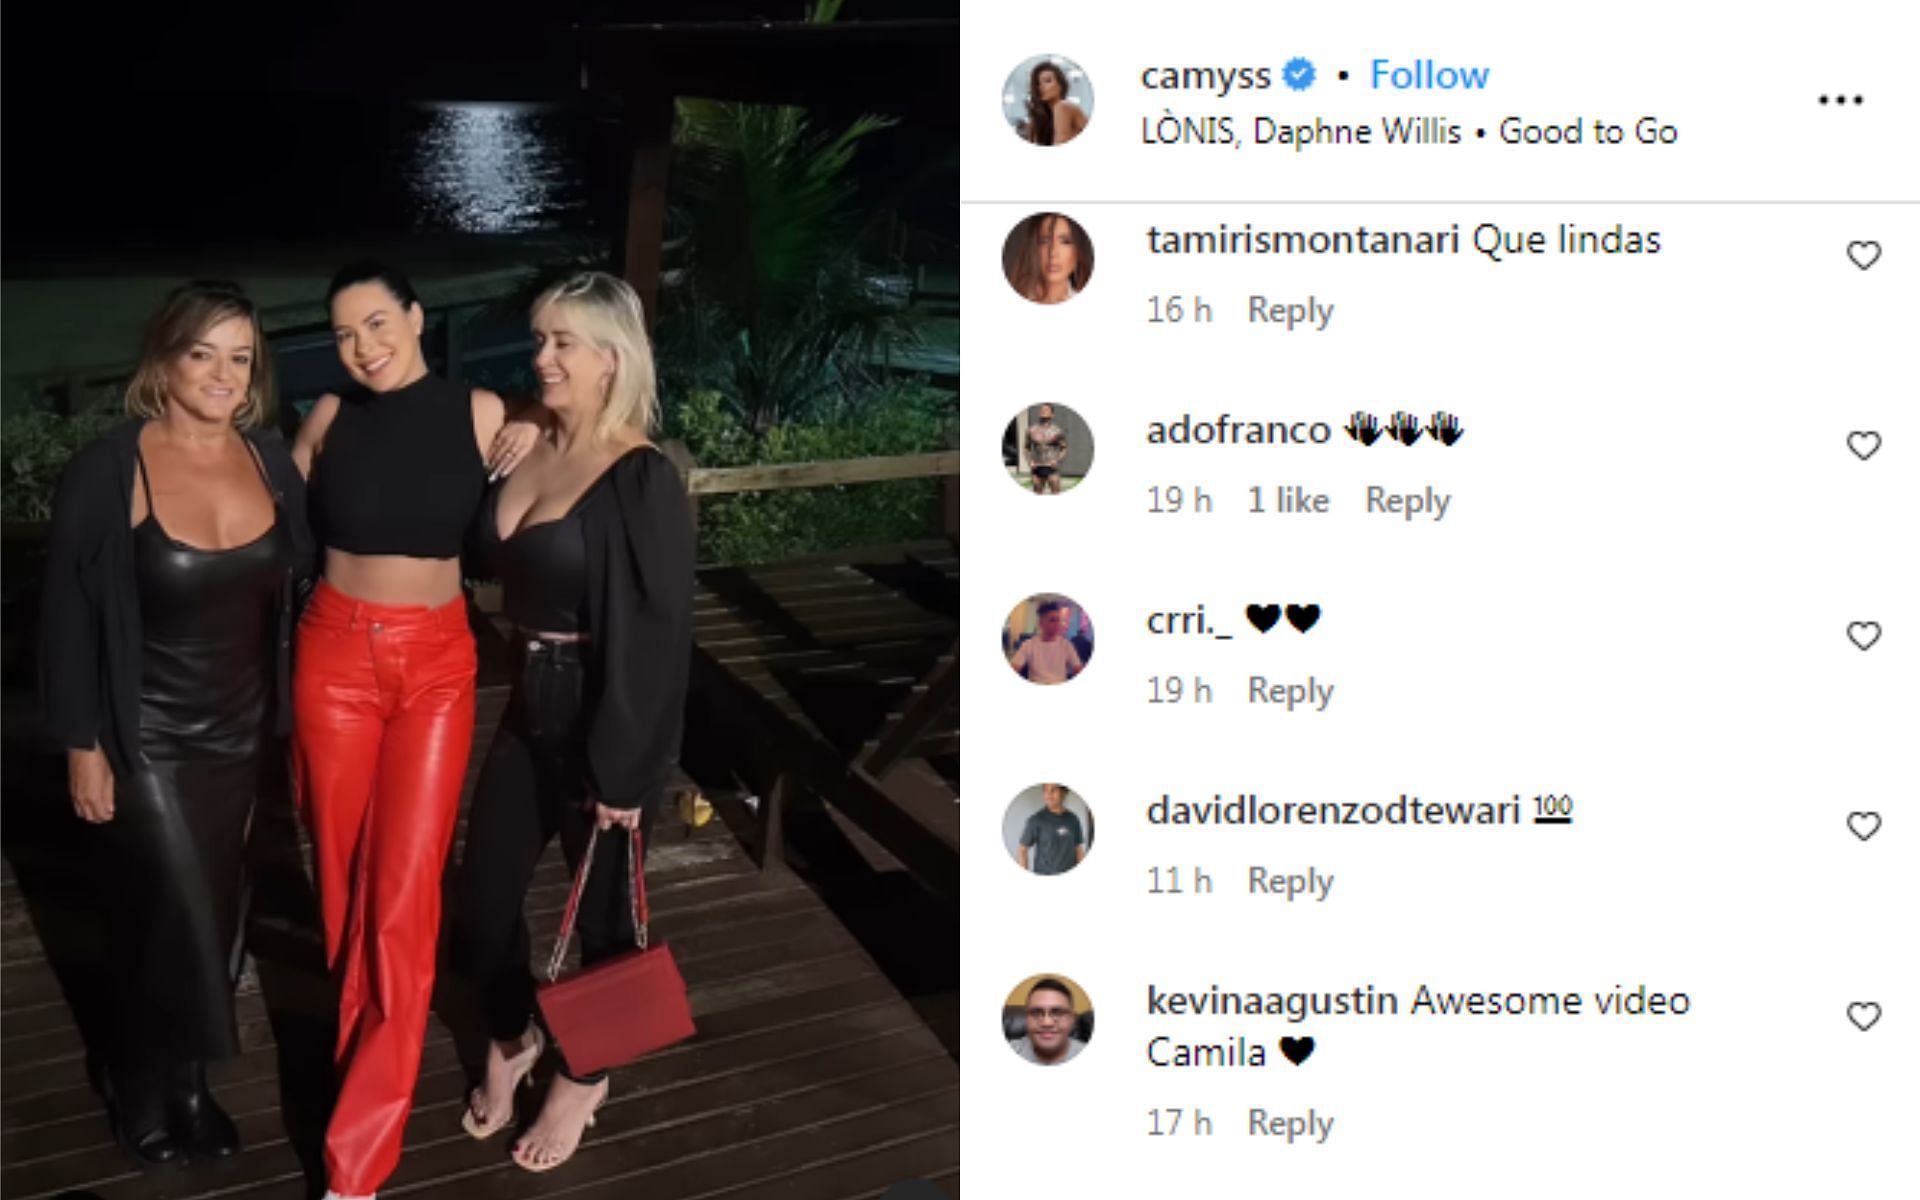 Popular ring girl Camila Oliveira recently welcomed a visit from her mother [Image Credit: Instagram.com/@camyss]